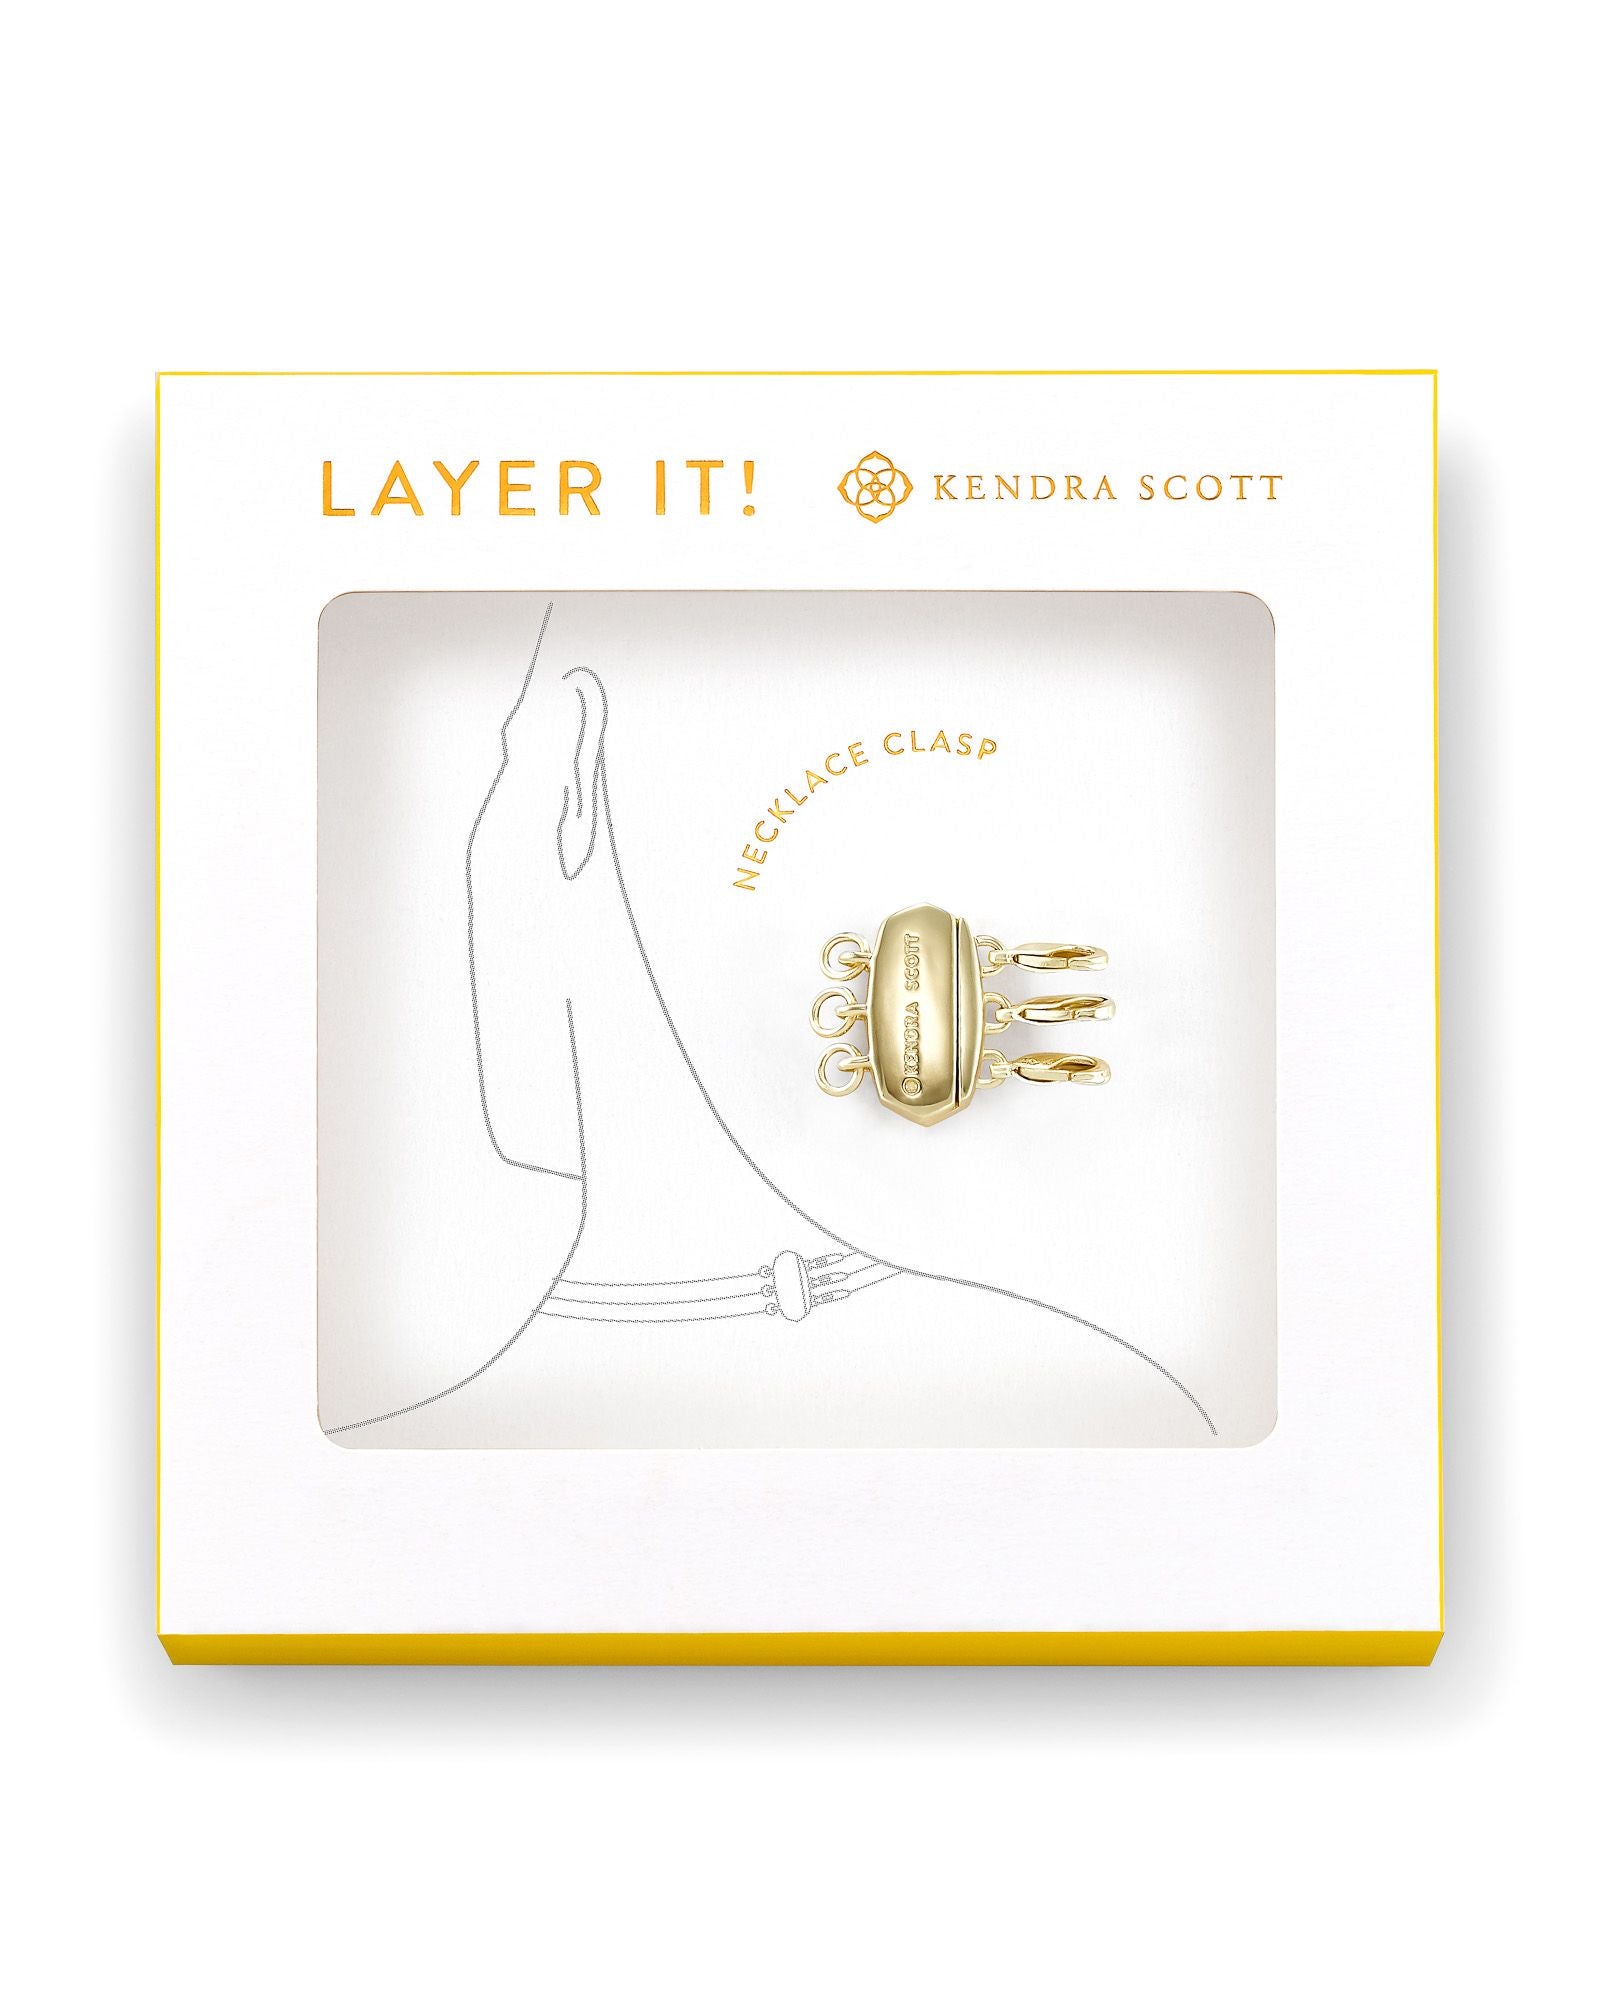 Kendra Scott Layer It Necklace Clasp in Gold Plated